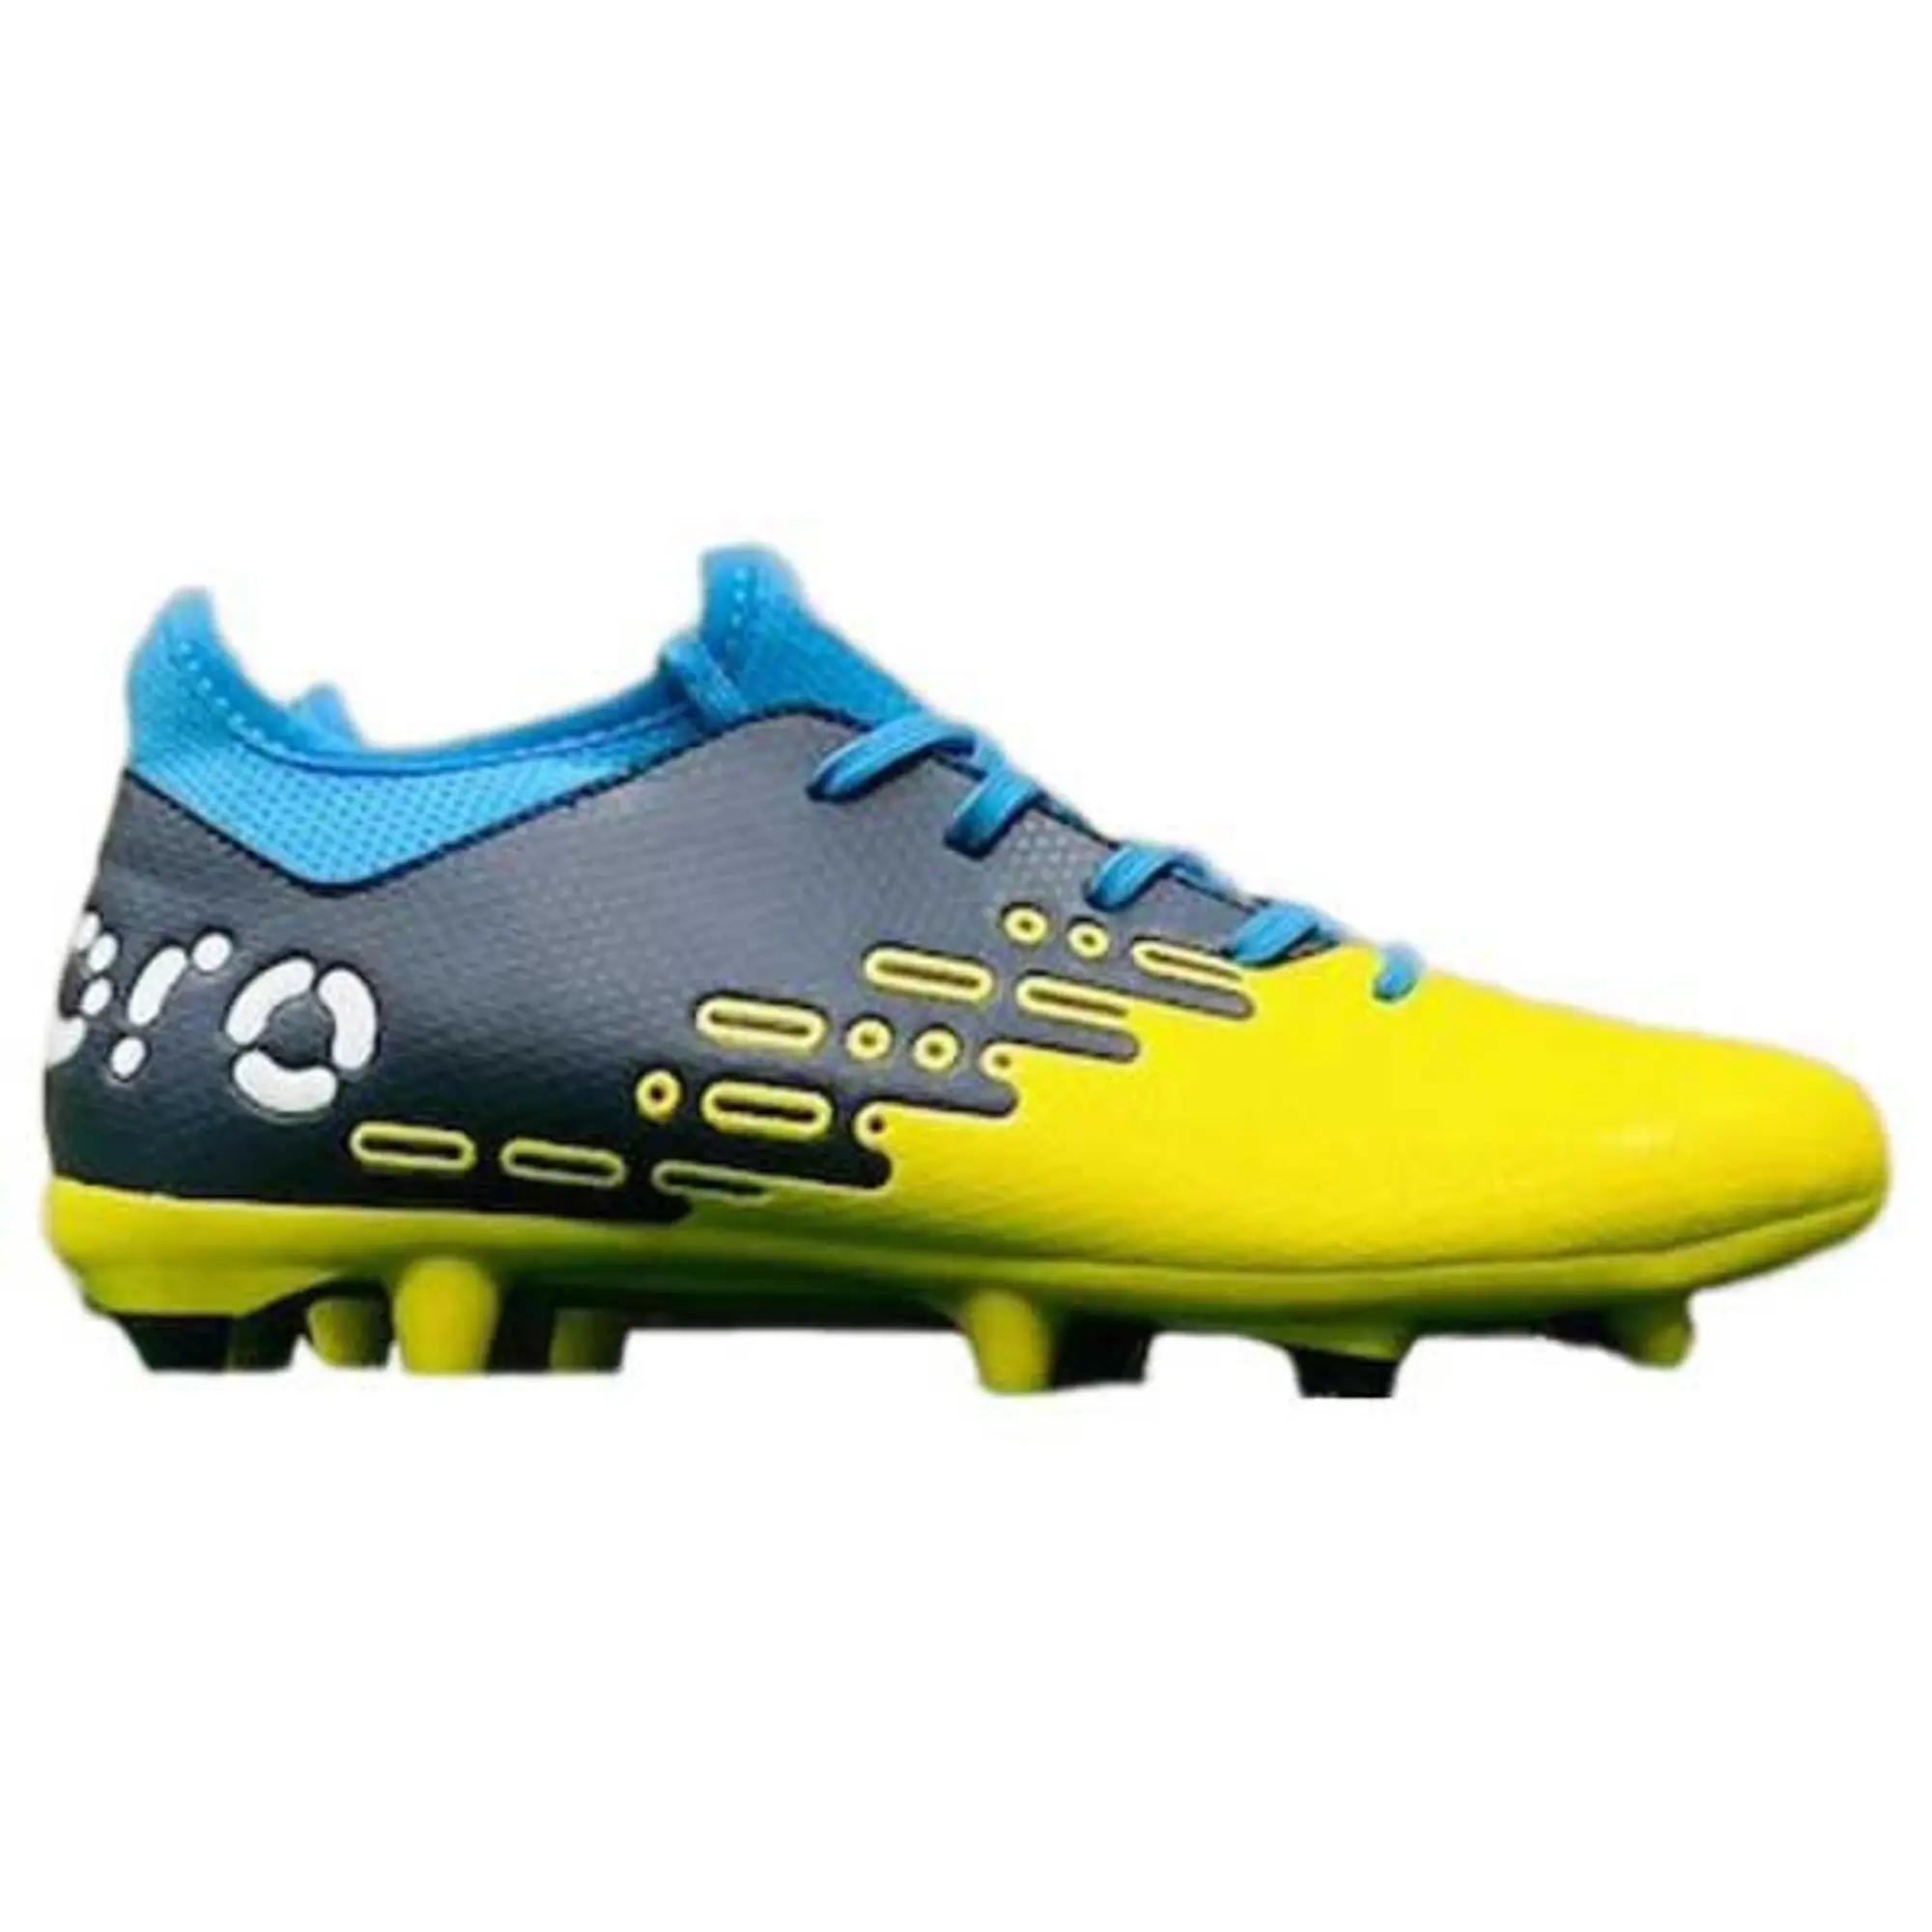 Umbro Cypher Ag Football Boots  - Yellow,Blue